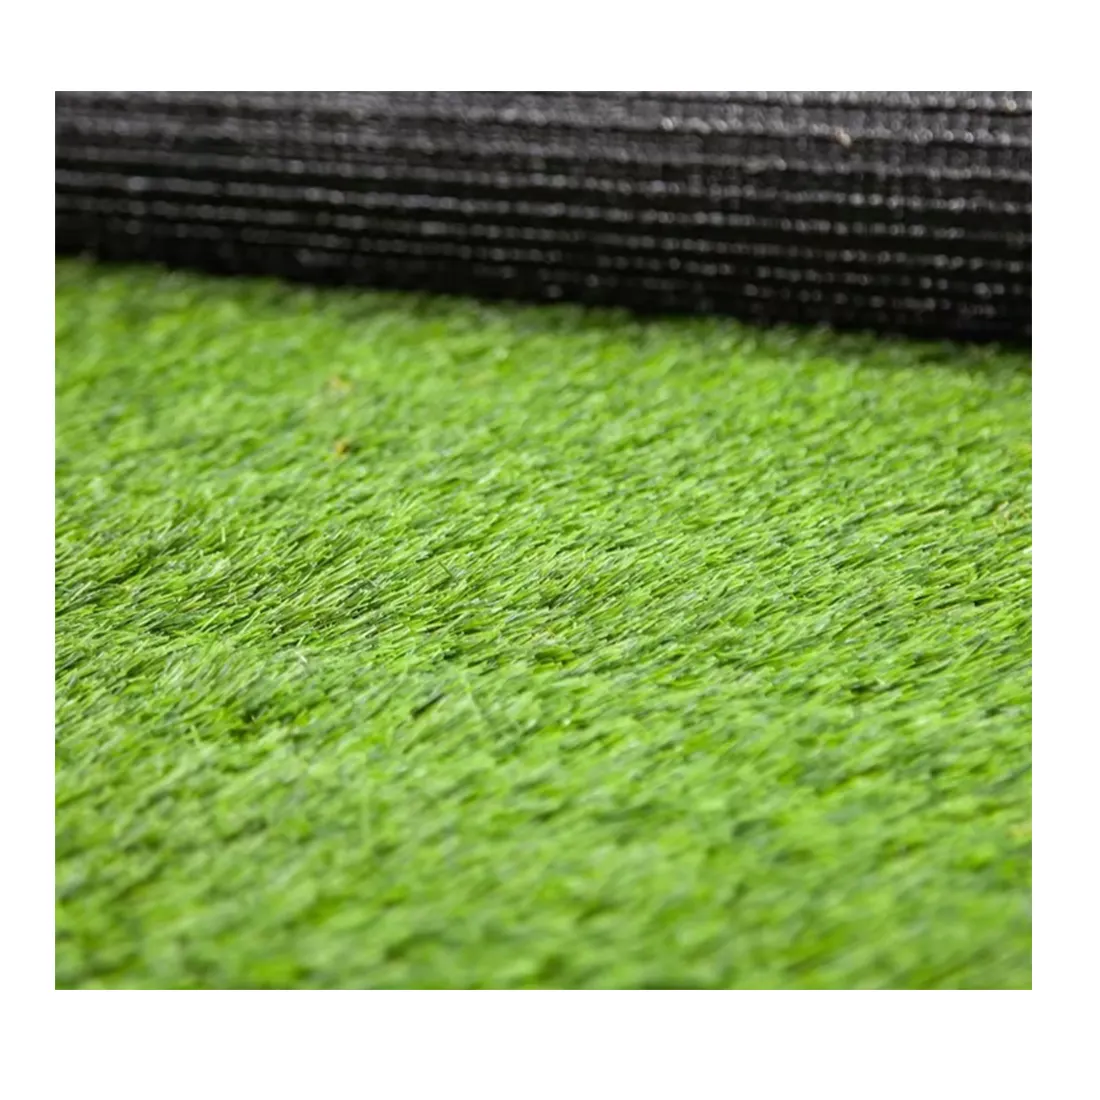 New Design Decoration Greenery Artificial Wall Grass Carpet Outdoor Garden With High Quality